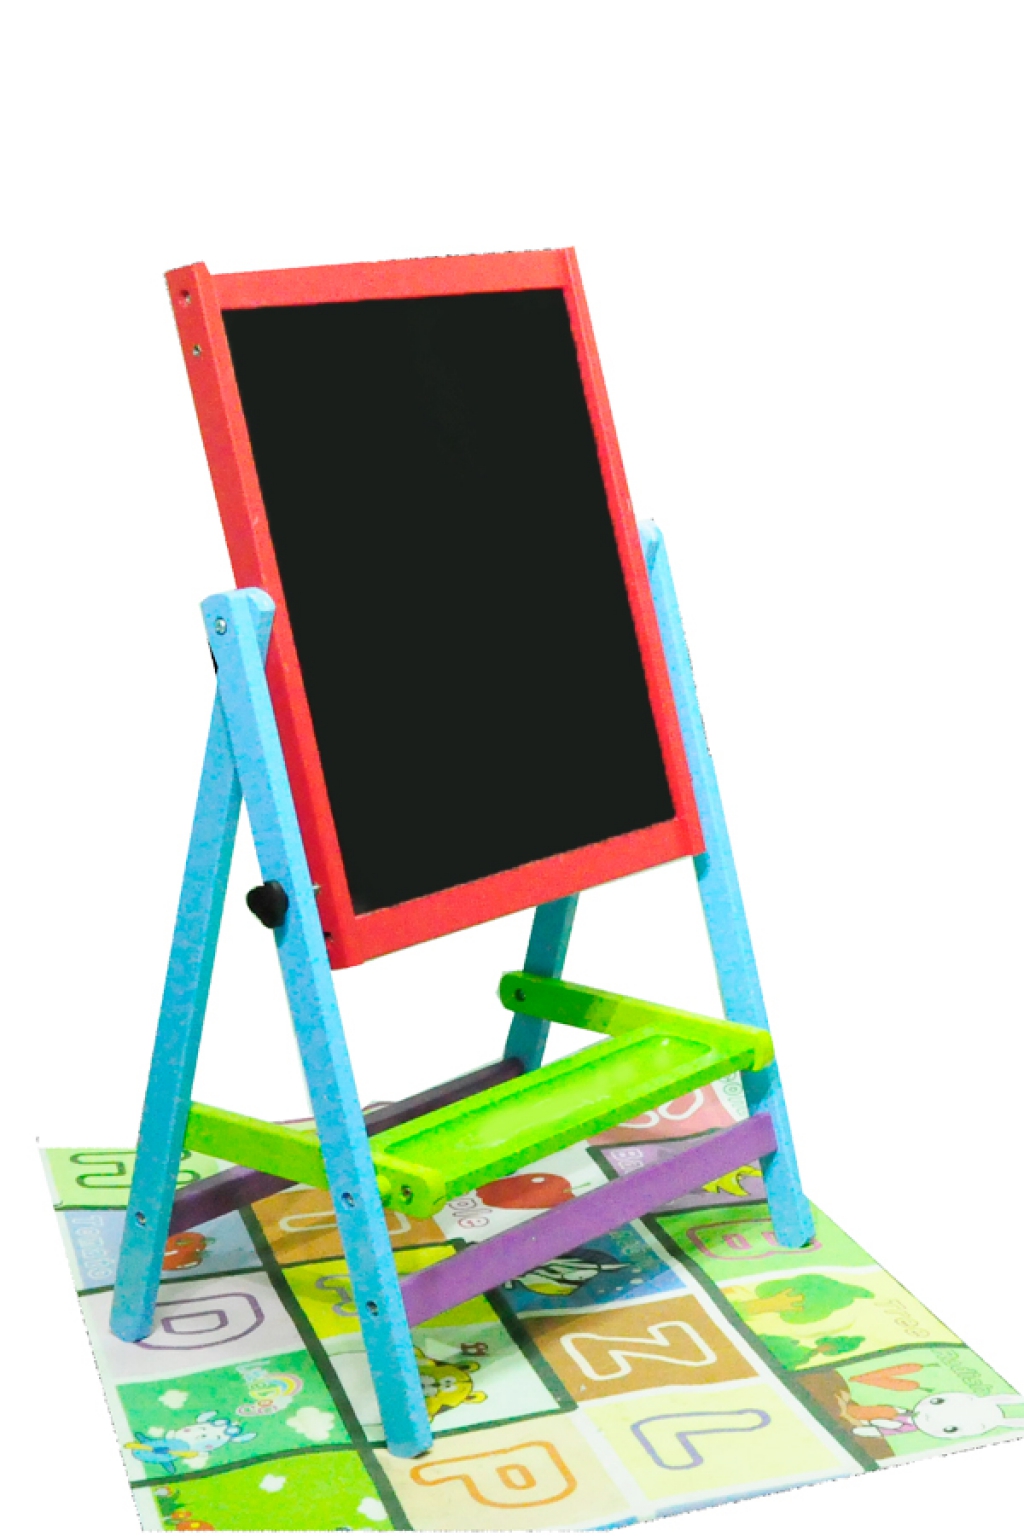                                         Two Sided Flip Easel                                         